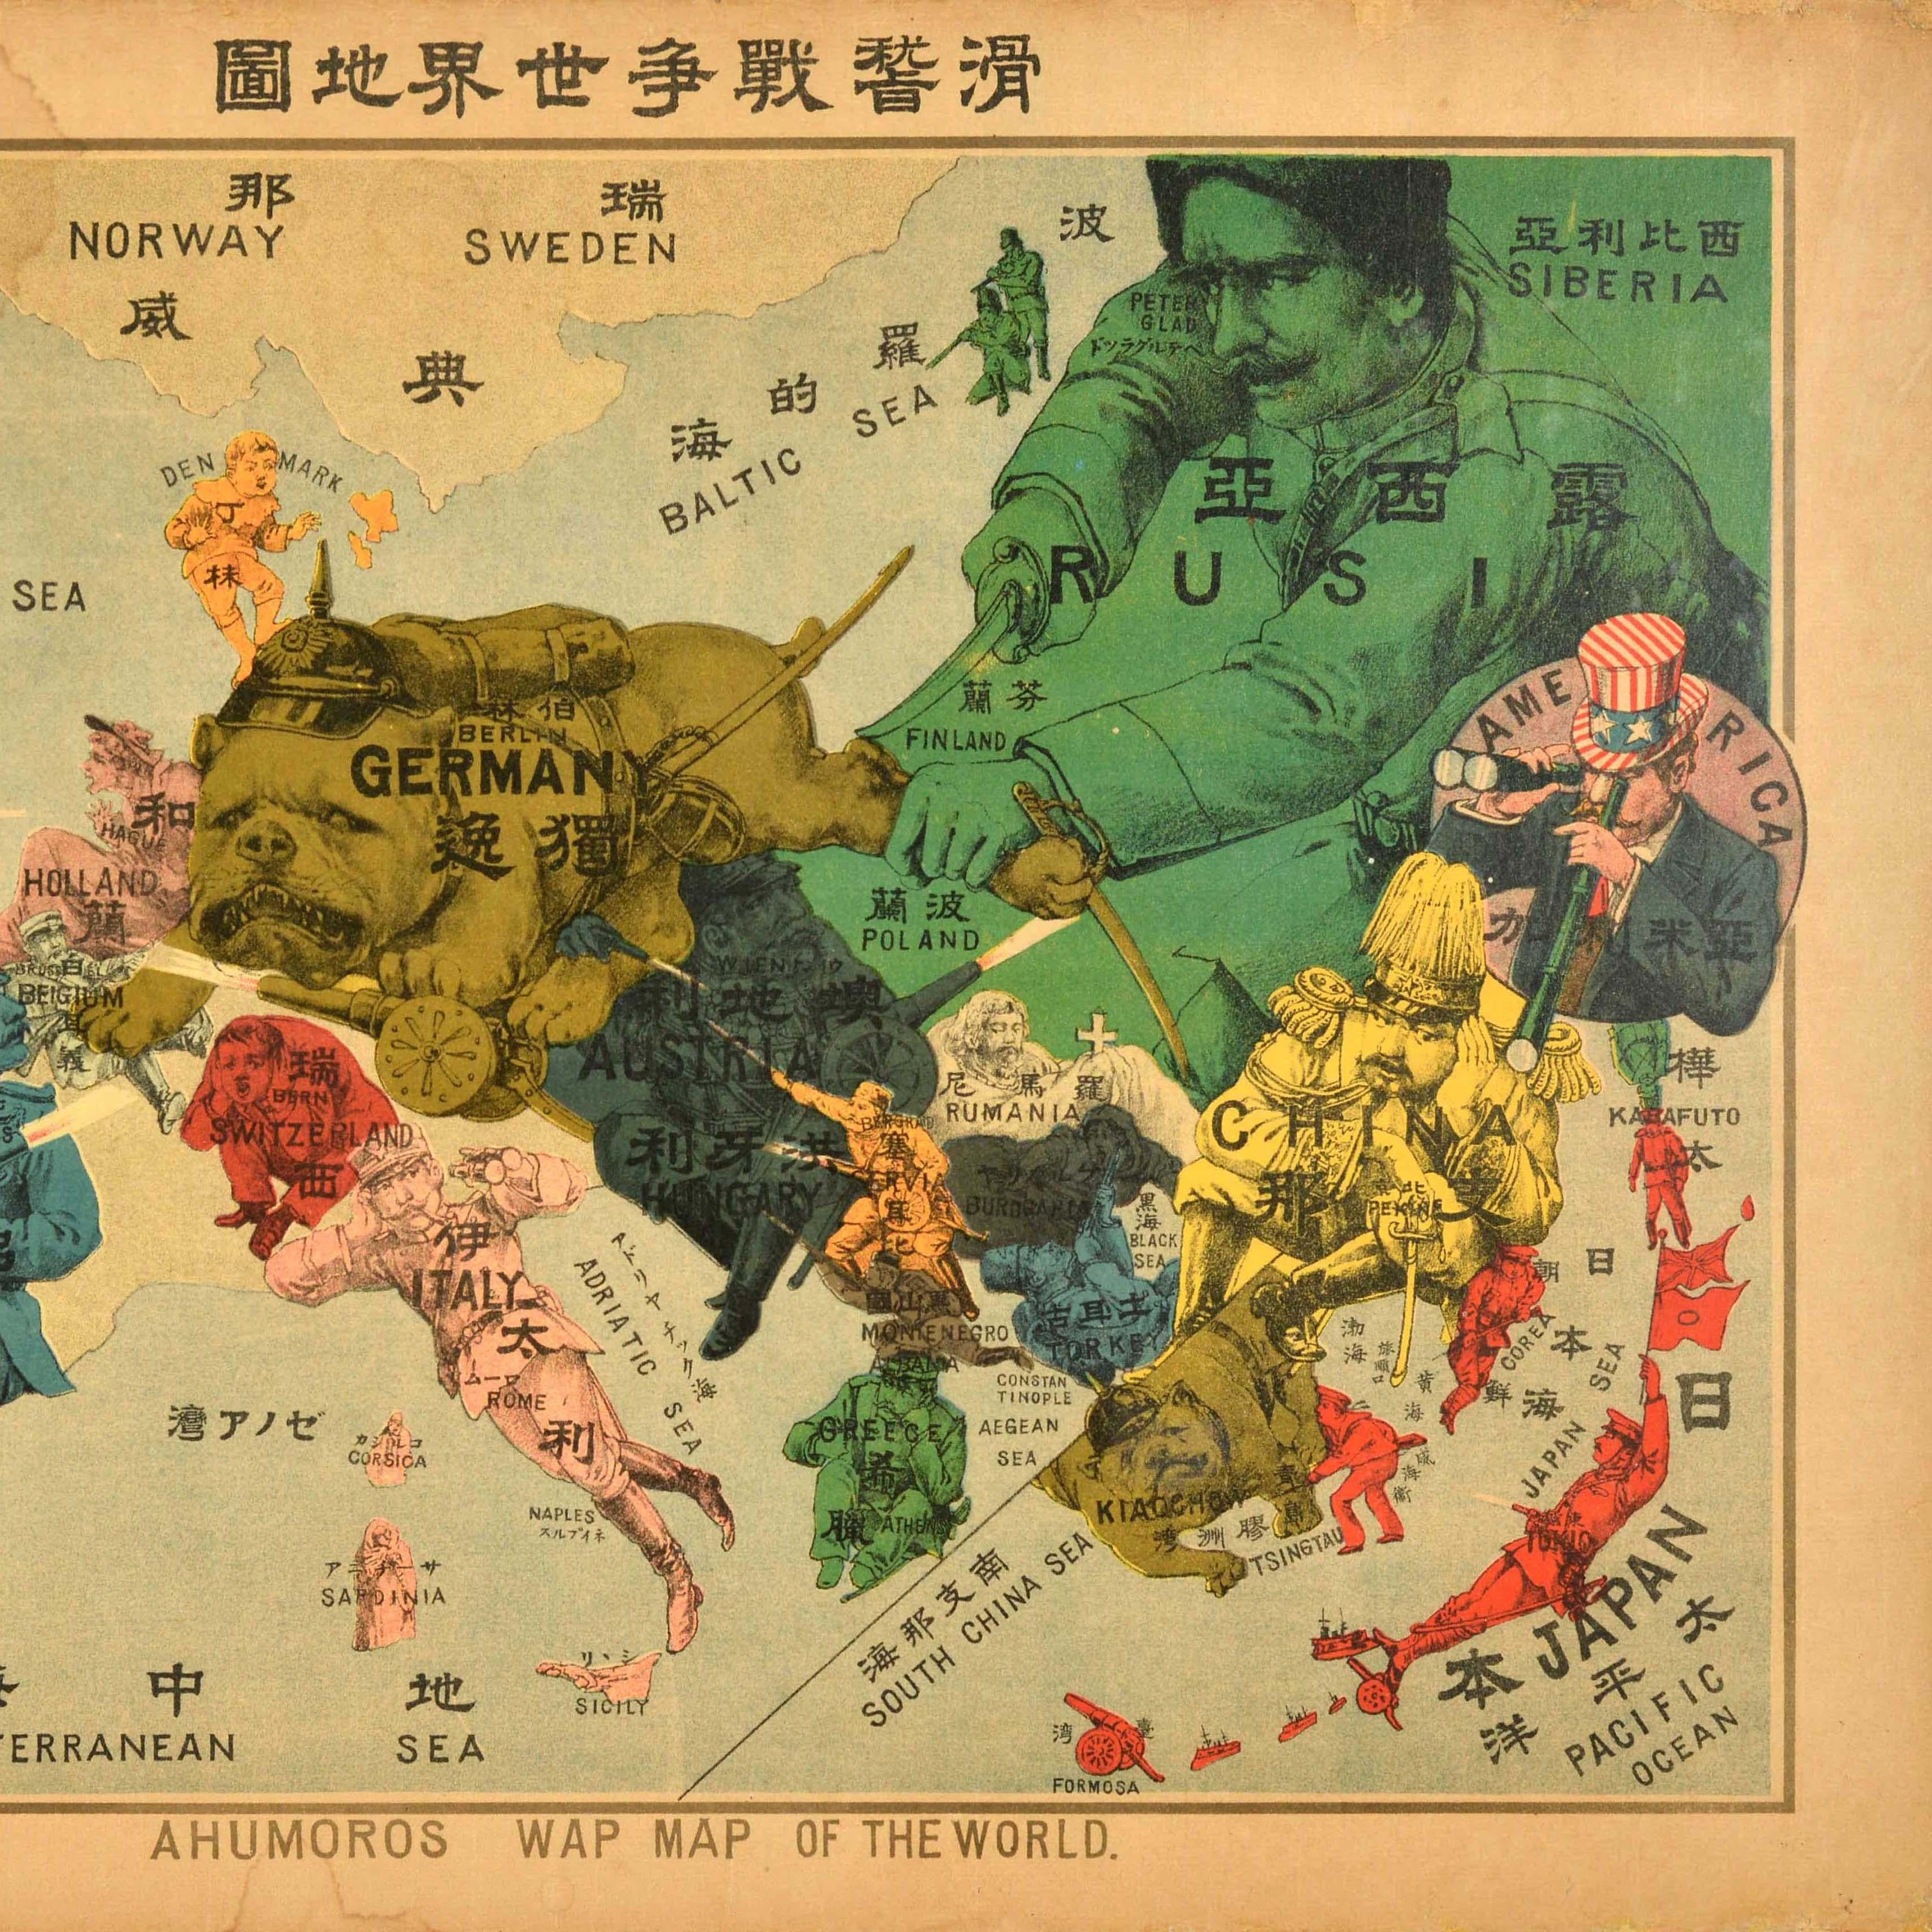 Original Antique World War One Humoros Wap Map Of The World WWI Japan Caricature In Good Condition For Sale In London, GB